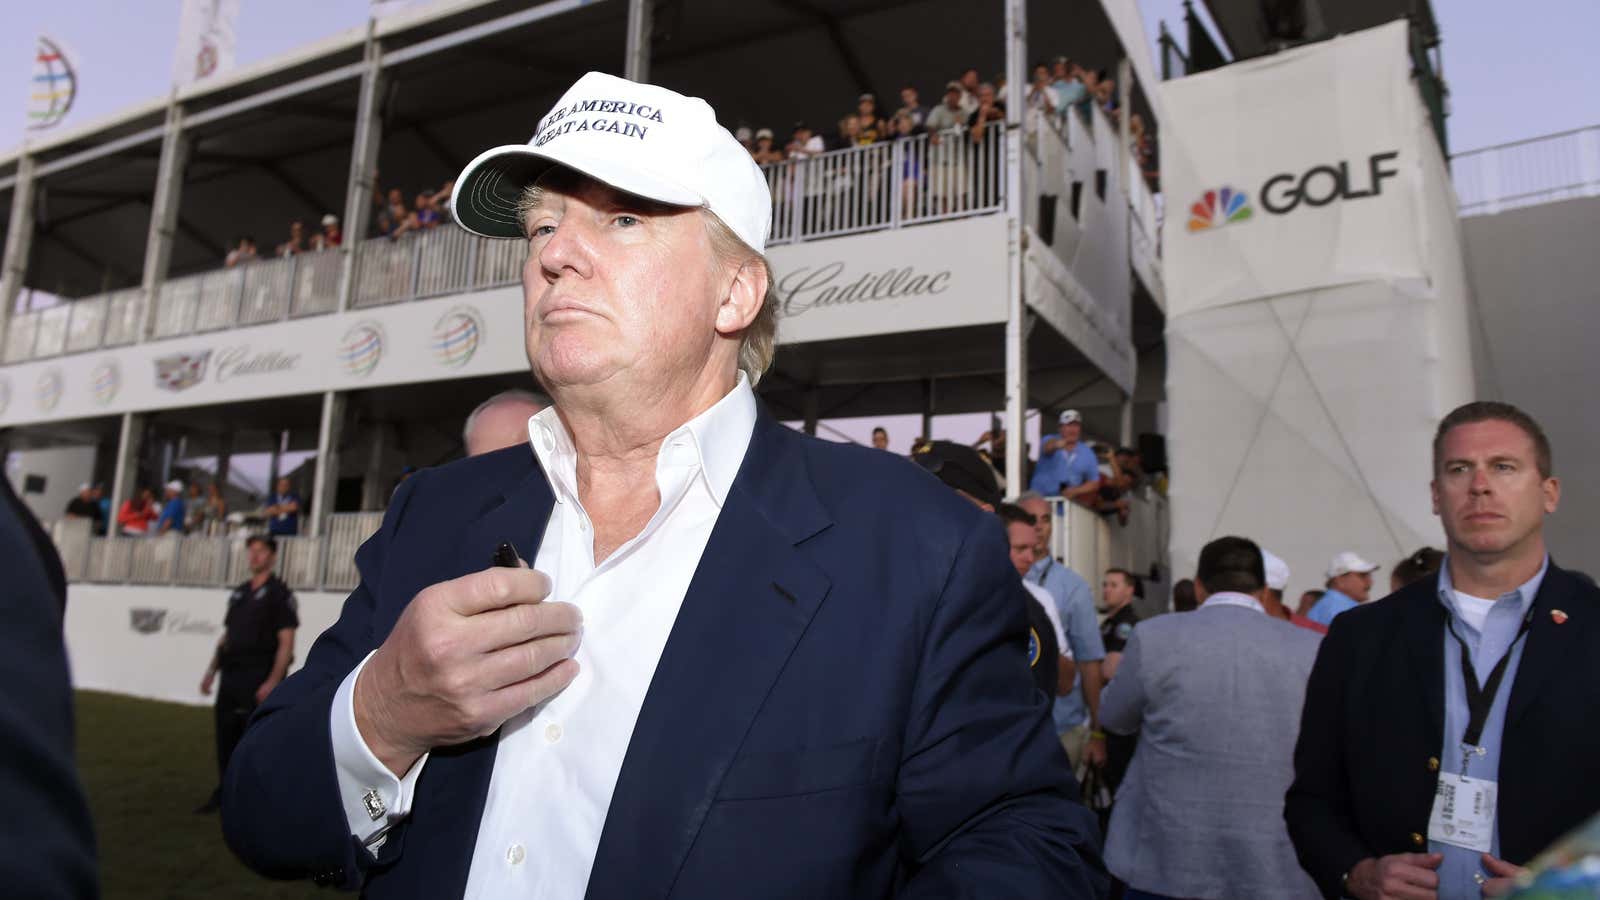 Then-candidate Donald Trump at his Trump National Doral golf resort in 2016.